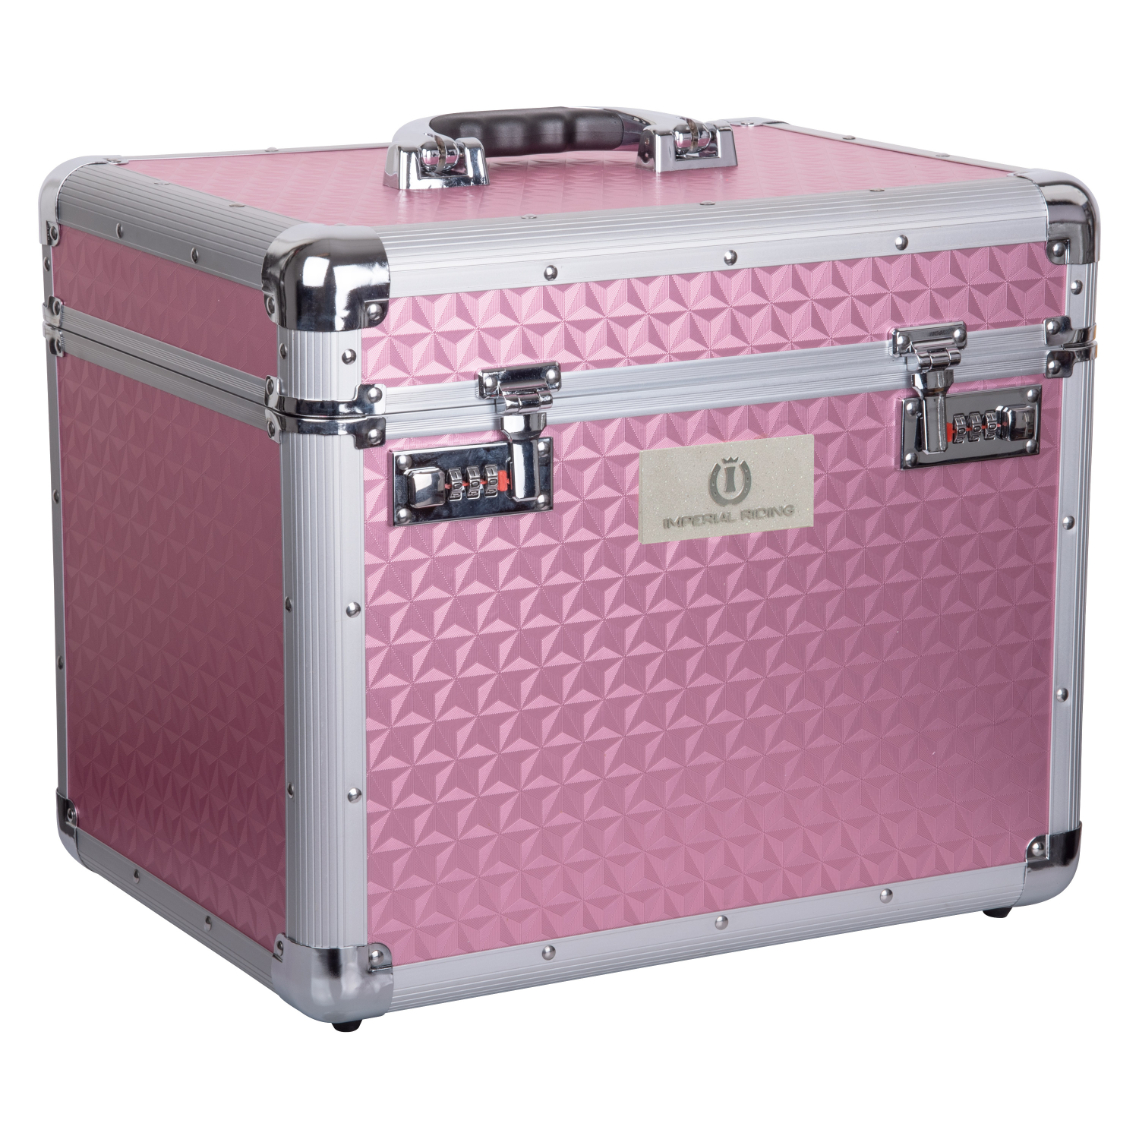 IMPERIAL RIDING Stabile Putzbox IRHShiny - pink - Stck. - 3